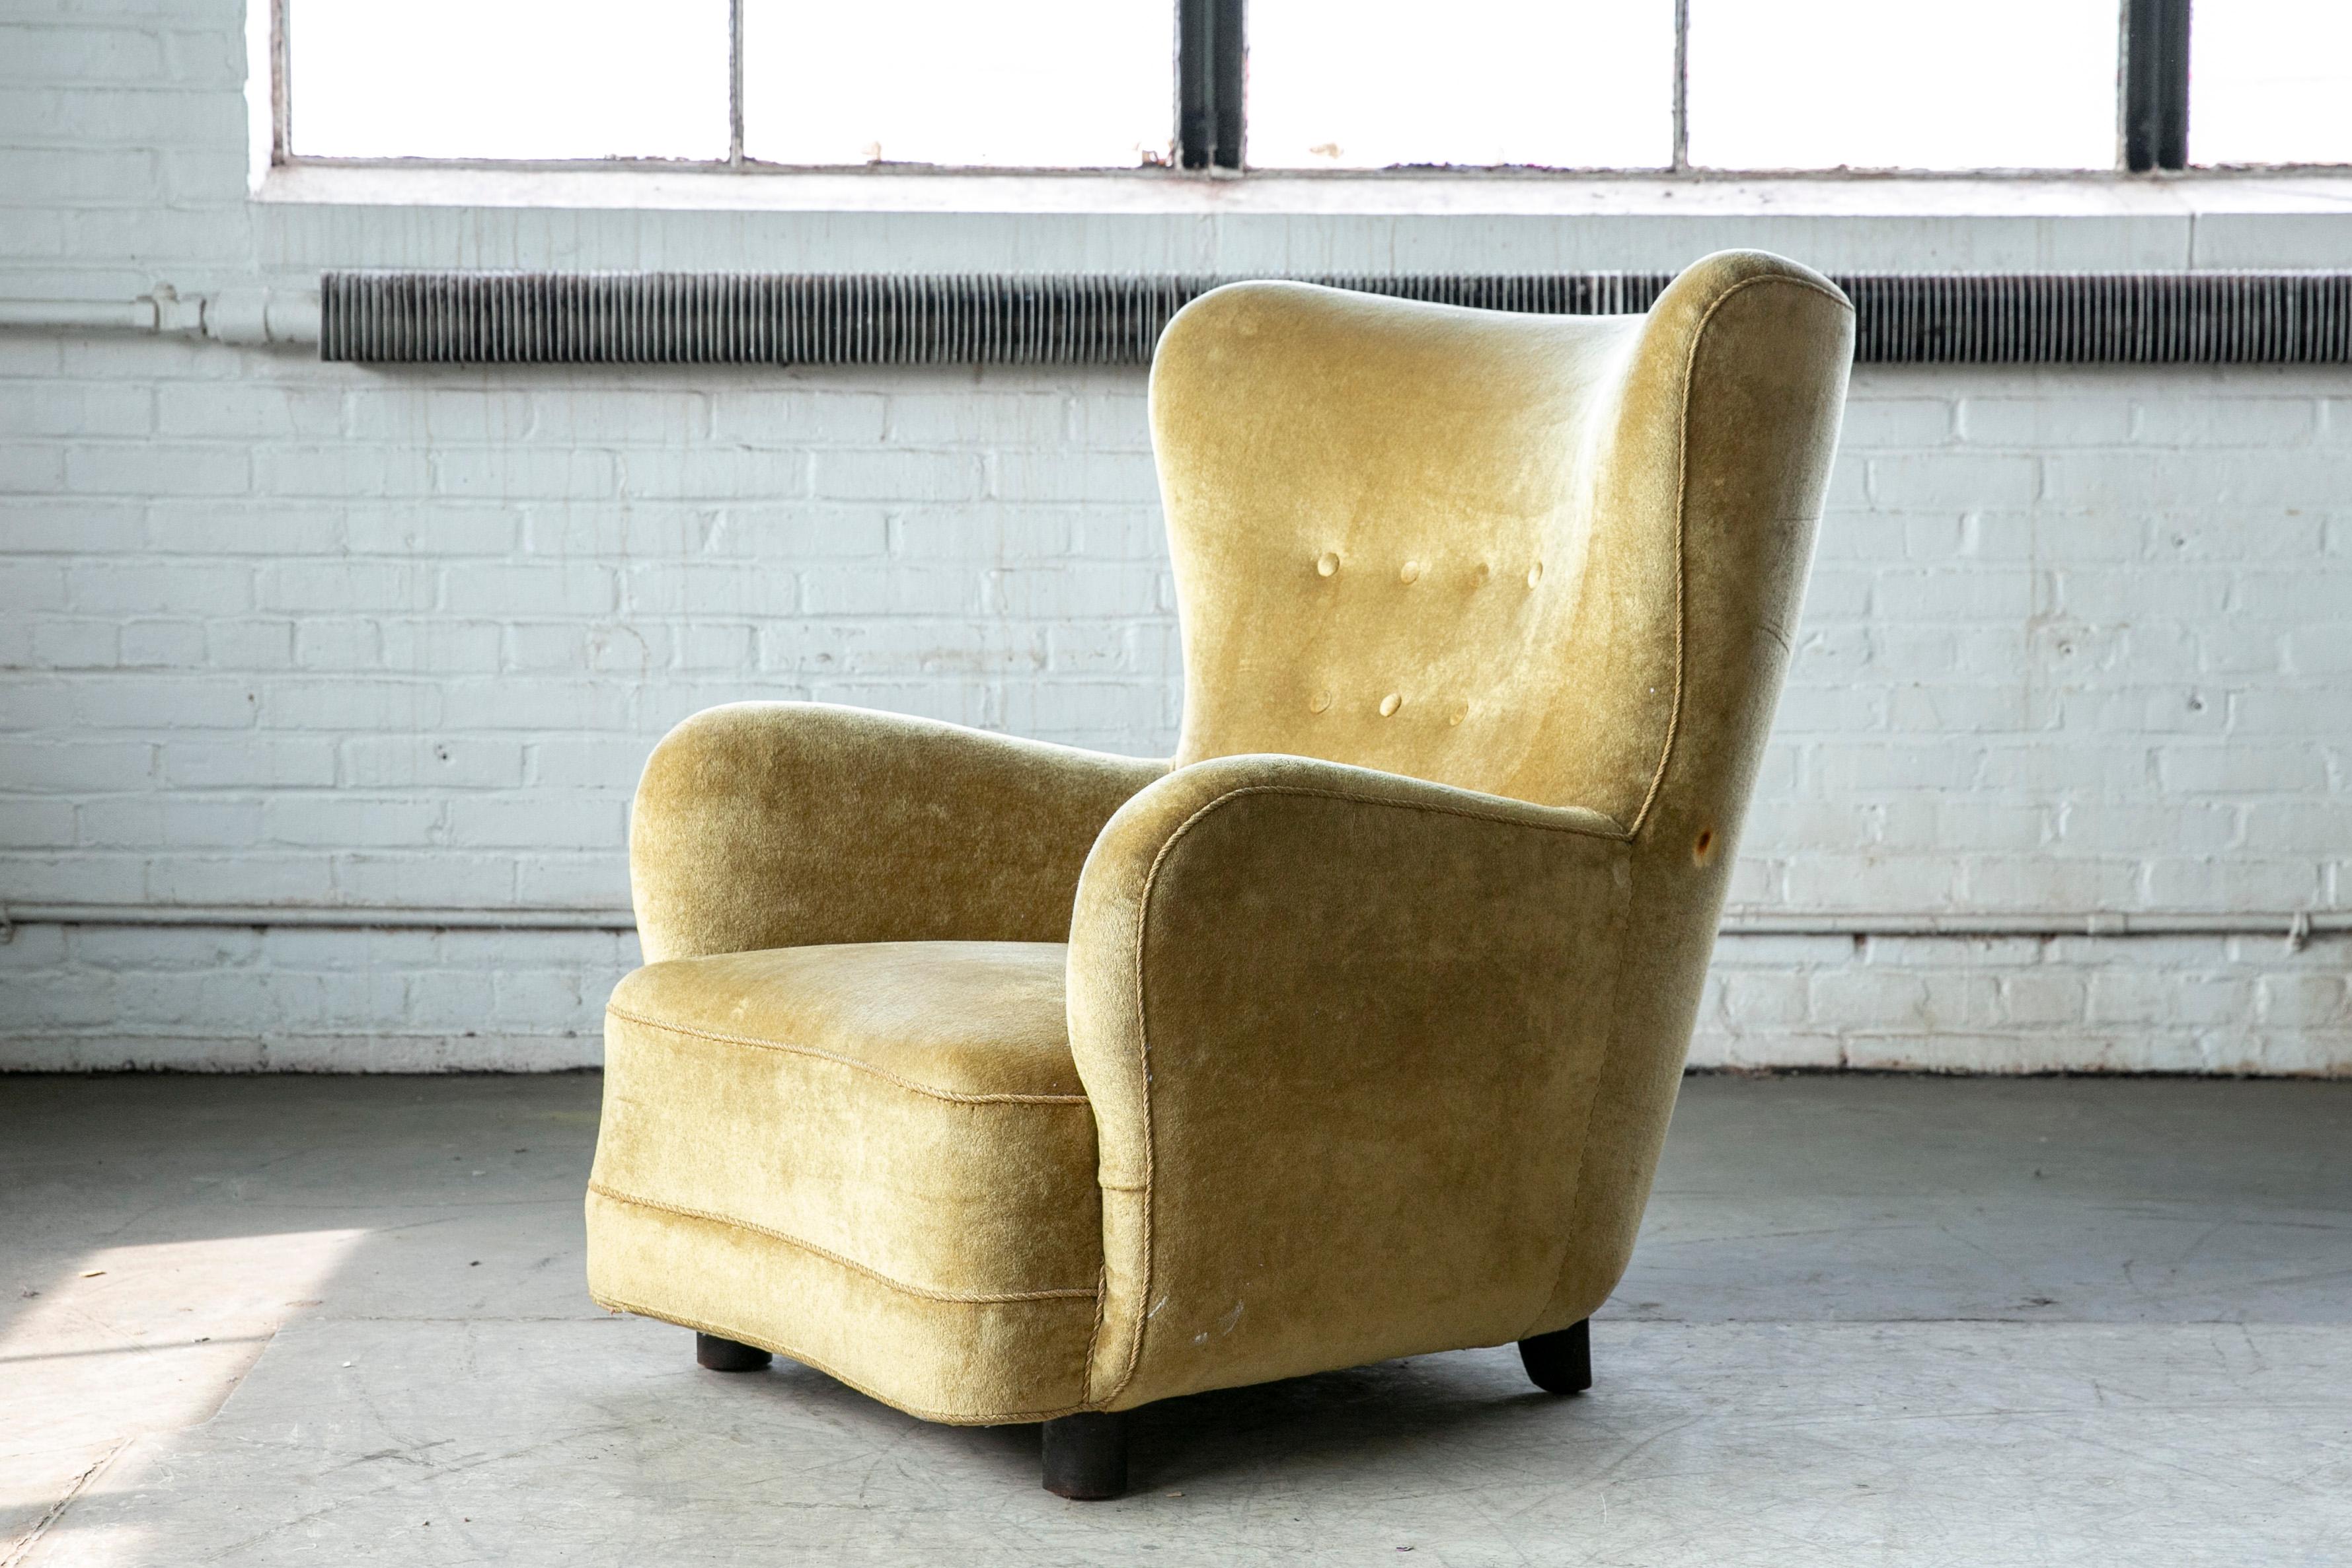 Mid-20th Century Danish, 1940s, Flemming Lassen Style High Back Lounge Chair in Mohair